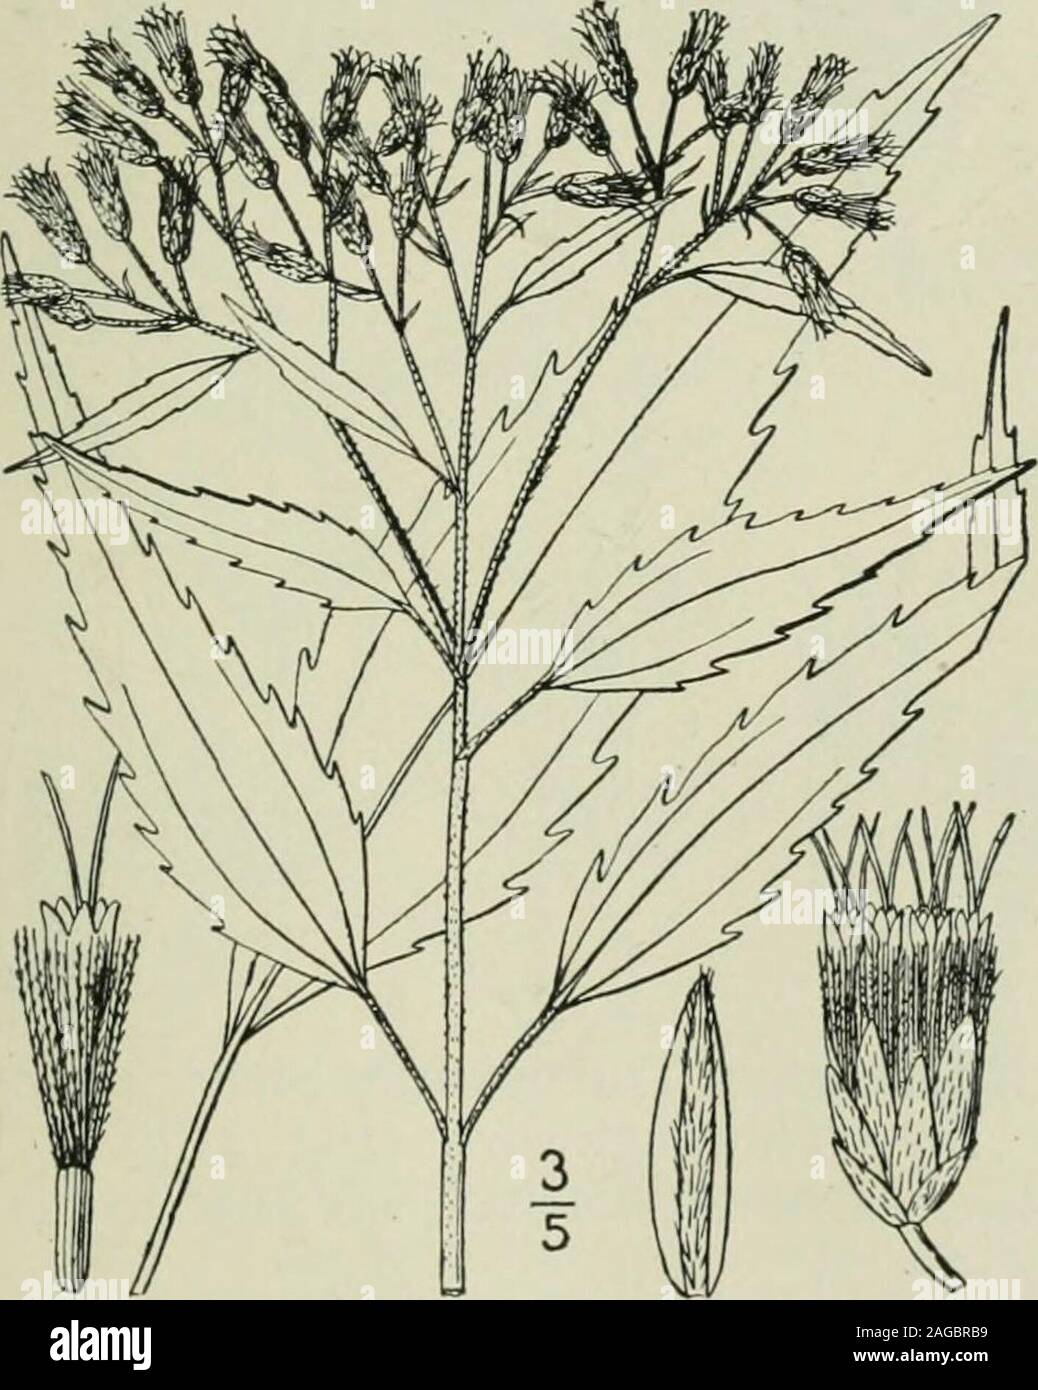 . An illustrated flora of the northern United States, Canada and the British possessions : from Newfoundland to the parallel of the southern boundary of Virginia and from the Atlantic Ocean westward to the 102nd meridian. 6. Eupatorium leucolepis T. & G. White-bracted Thoroughwort. Justice-weed.Fig. 4157.E. leucolepis T. & G. Fl. N. A. 2 : 84. 1841. Slender, puberulent, branched above, i°-2°high. Leaves opposite, sessile, linear, oblongor oblong-lanceolate, glaucous green, rough onboth sides, thick, blunt-pointed, sparingly ser-rate, or the upper entire, i-3 long, 2-$ wide,obscurely 3-nerved a Stock Photo